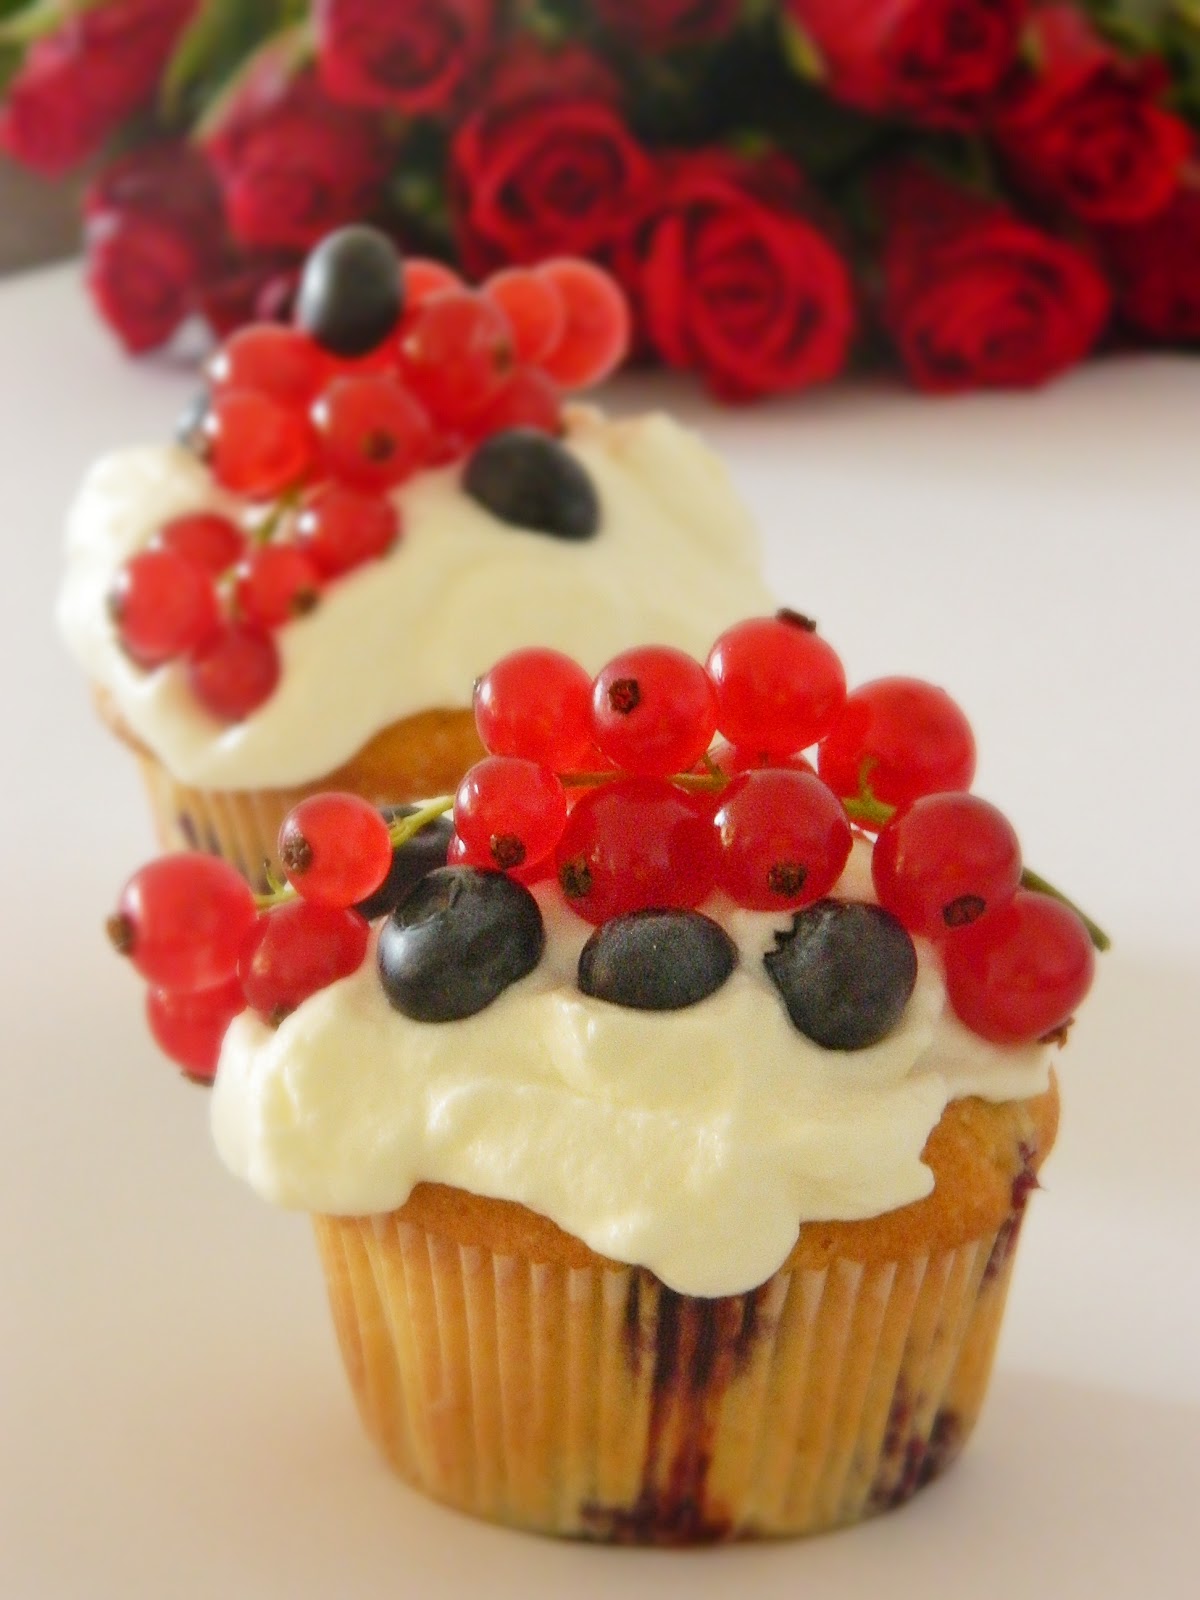 Dr Ola&amp;#39;s kitchen: Red Currant Blueberry cream Cupcakes (Johannisbeere ...